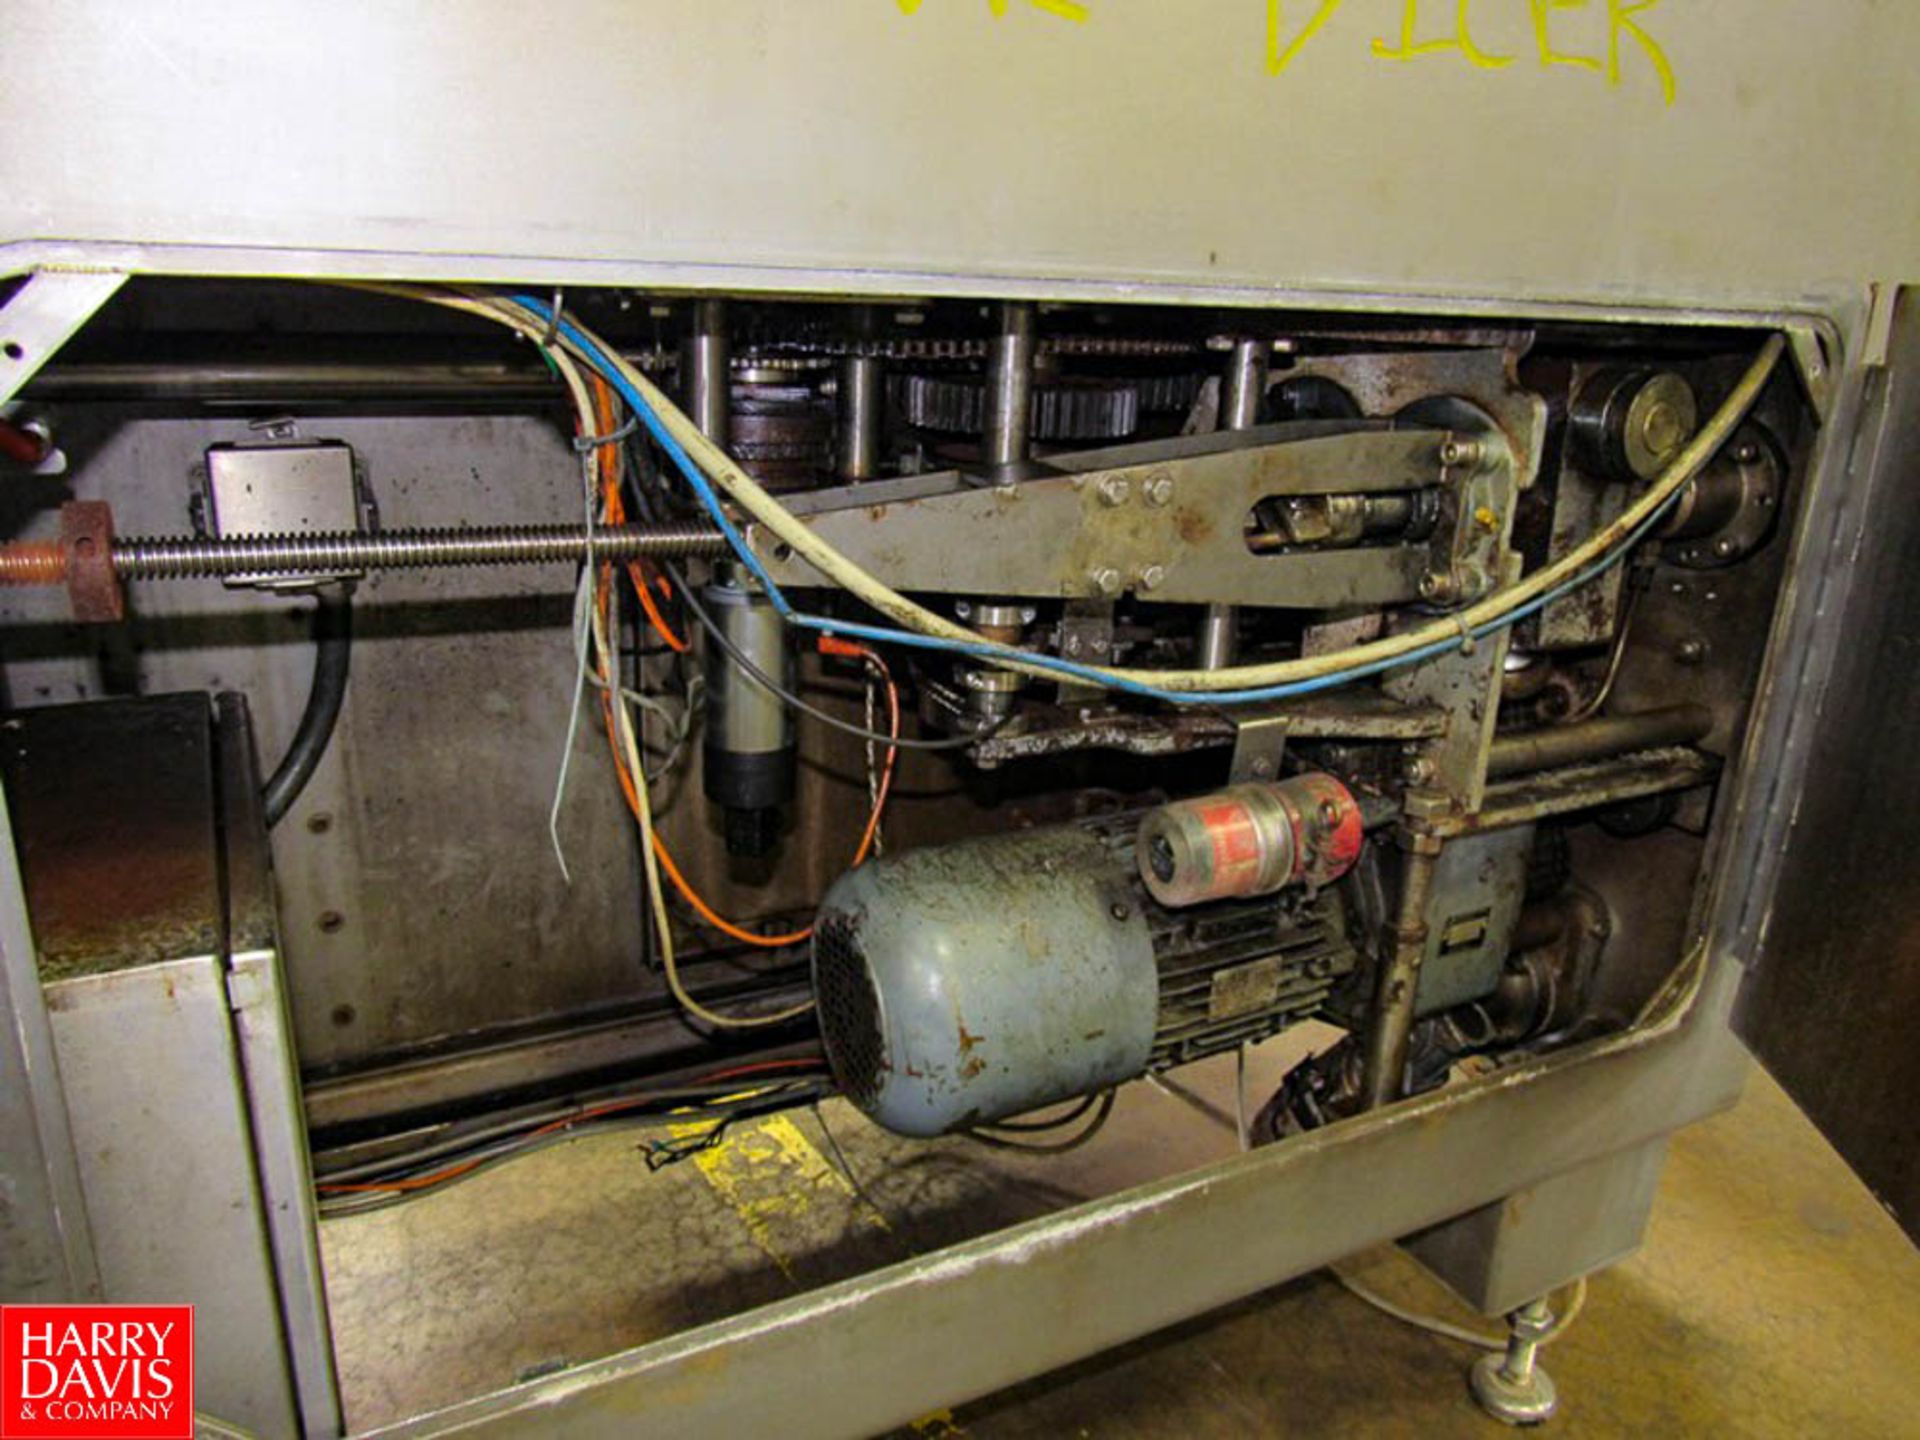 Holac Dicer, multiple grids, 220 volts Rigging Fee: $ 150 - Image 5 of 11